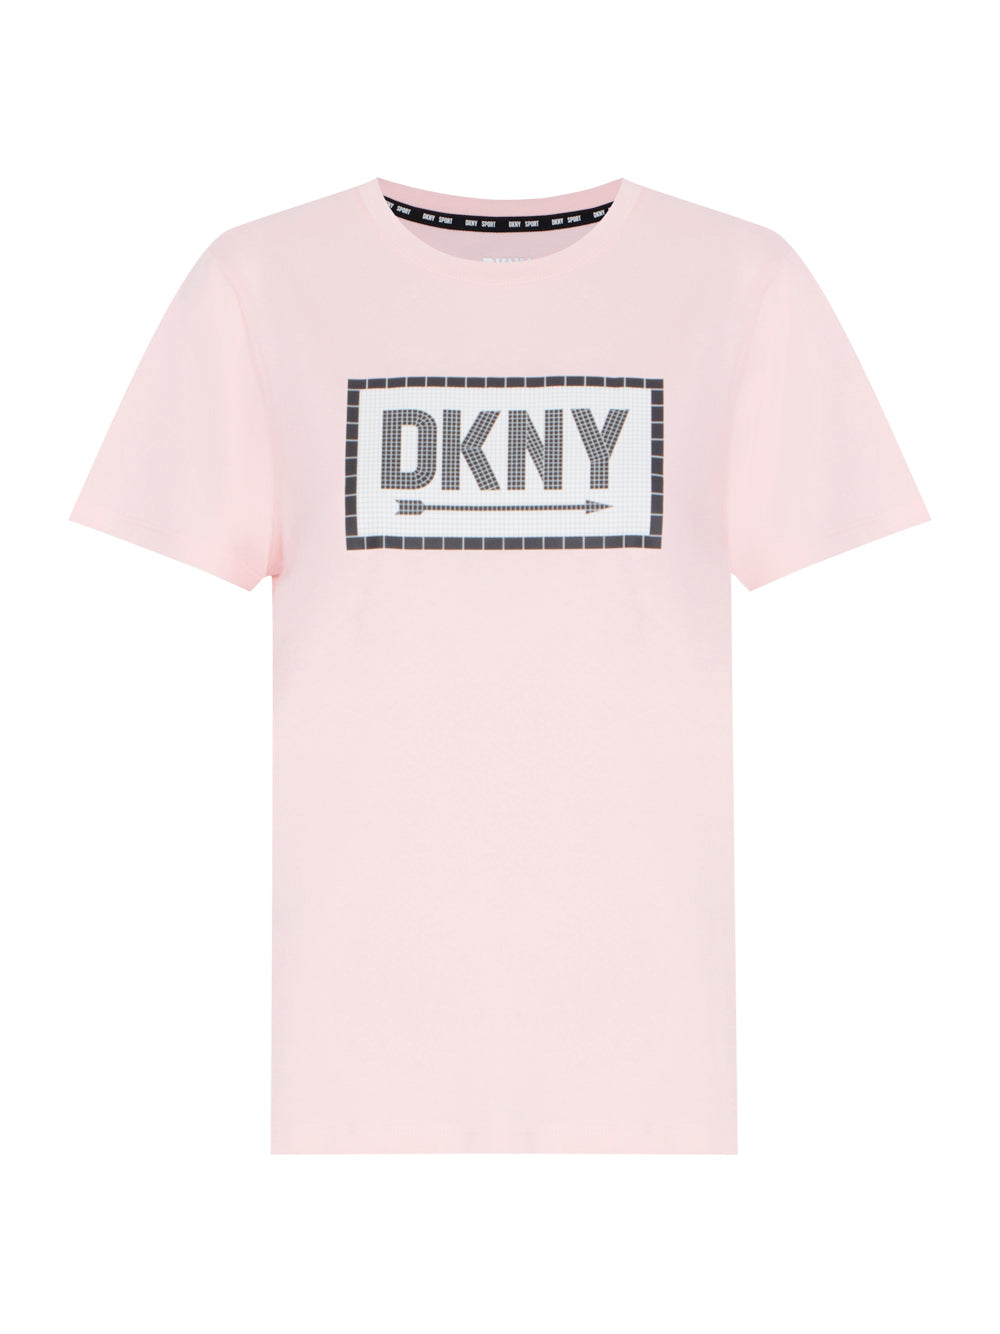 Subway Tile Graphic Tee (Crystal Rose)